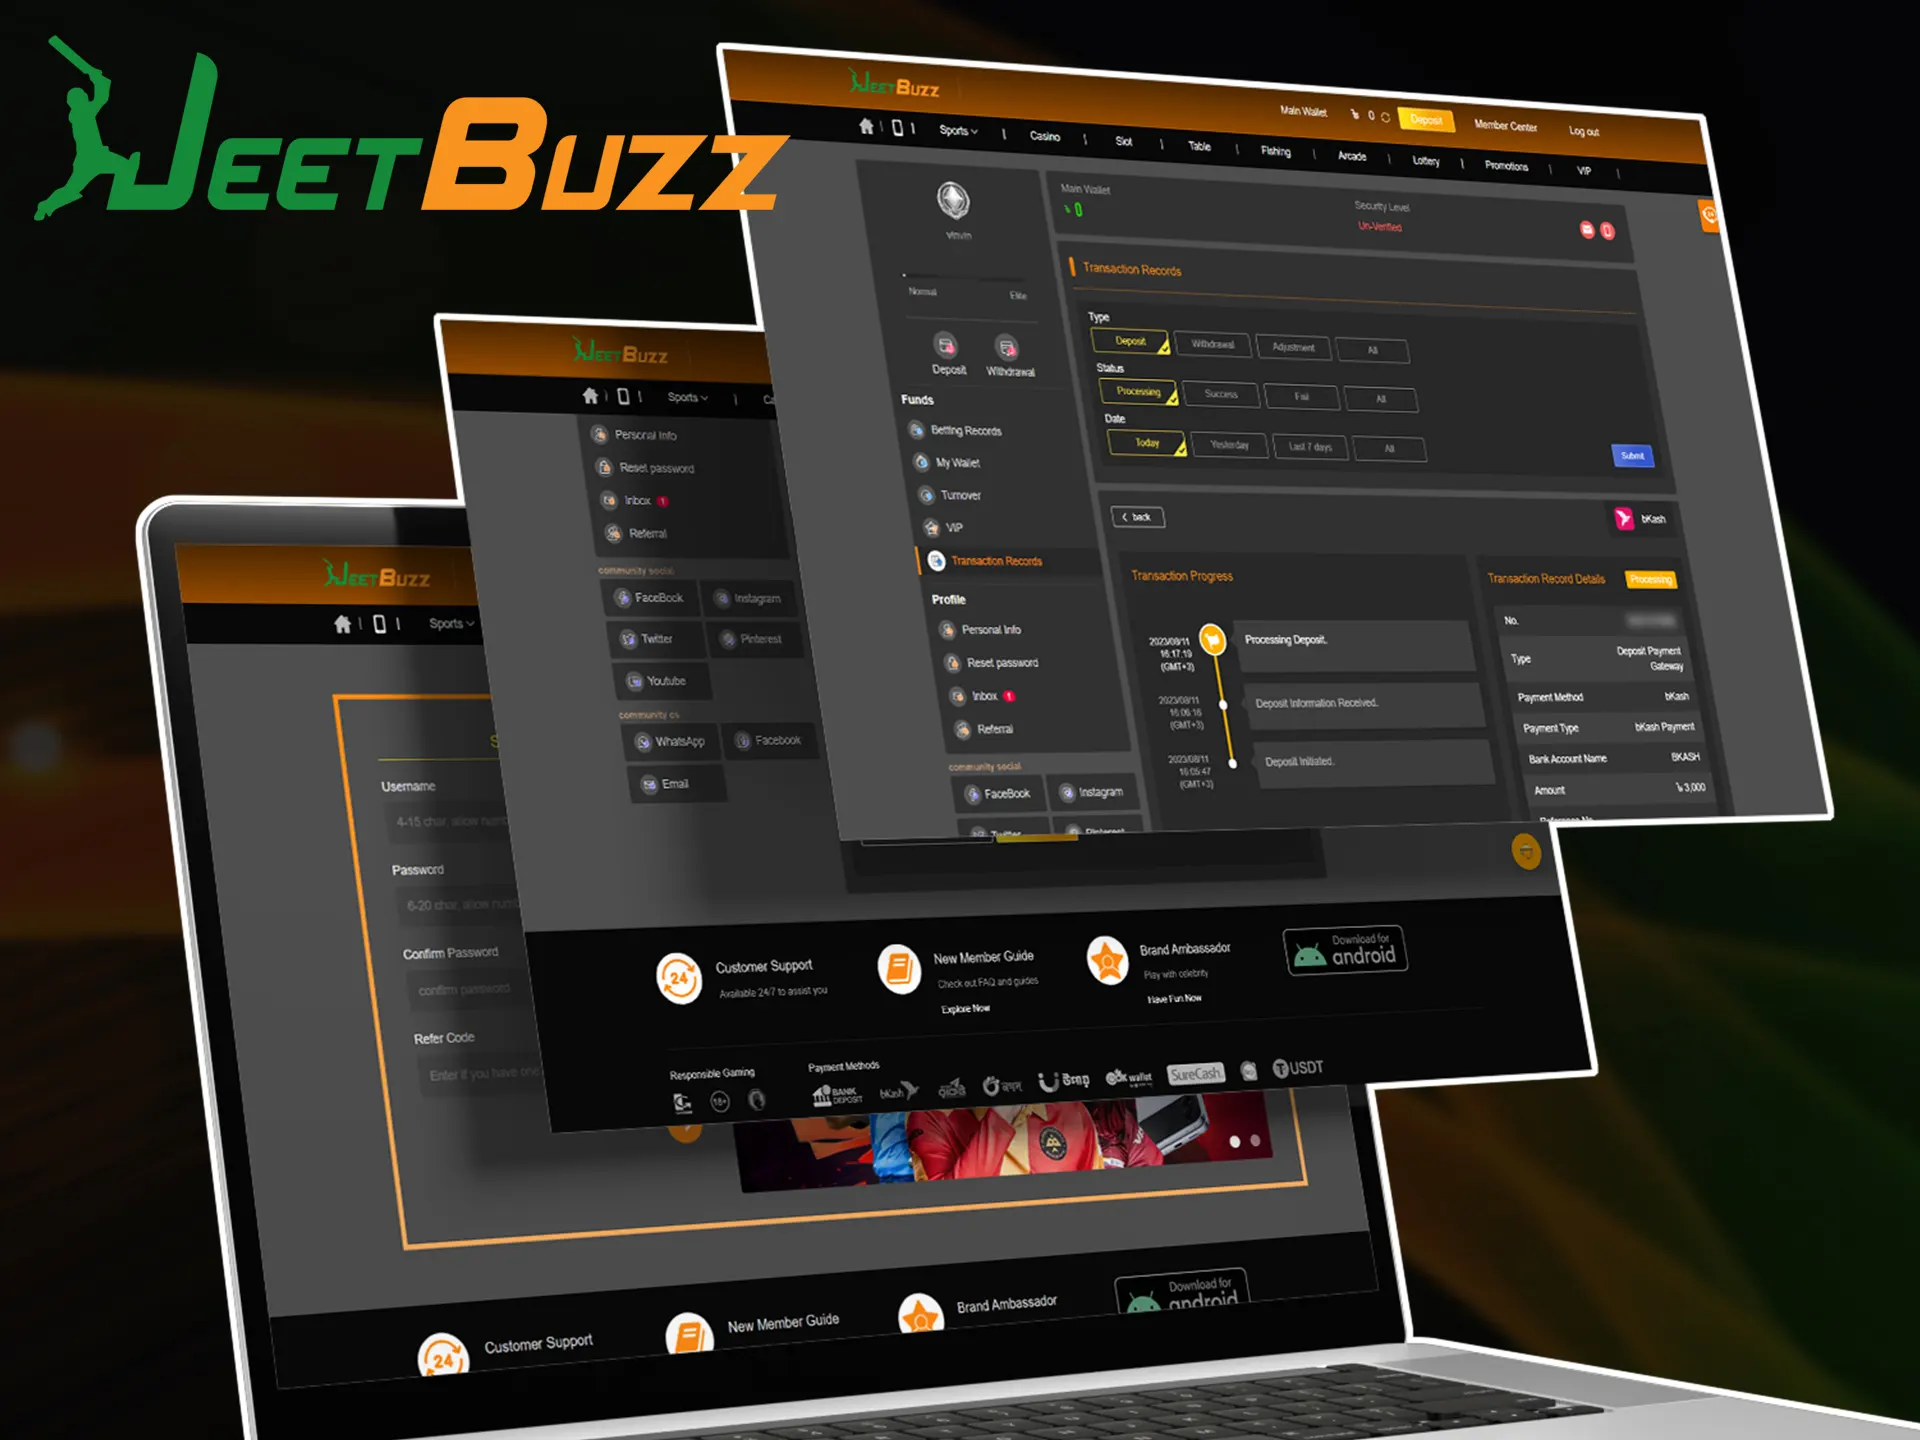 Follow the instructions to start betting on JeetBuzz.